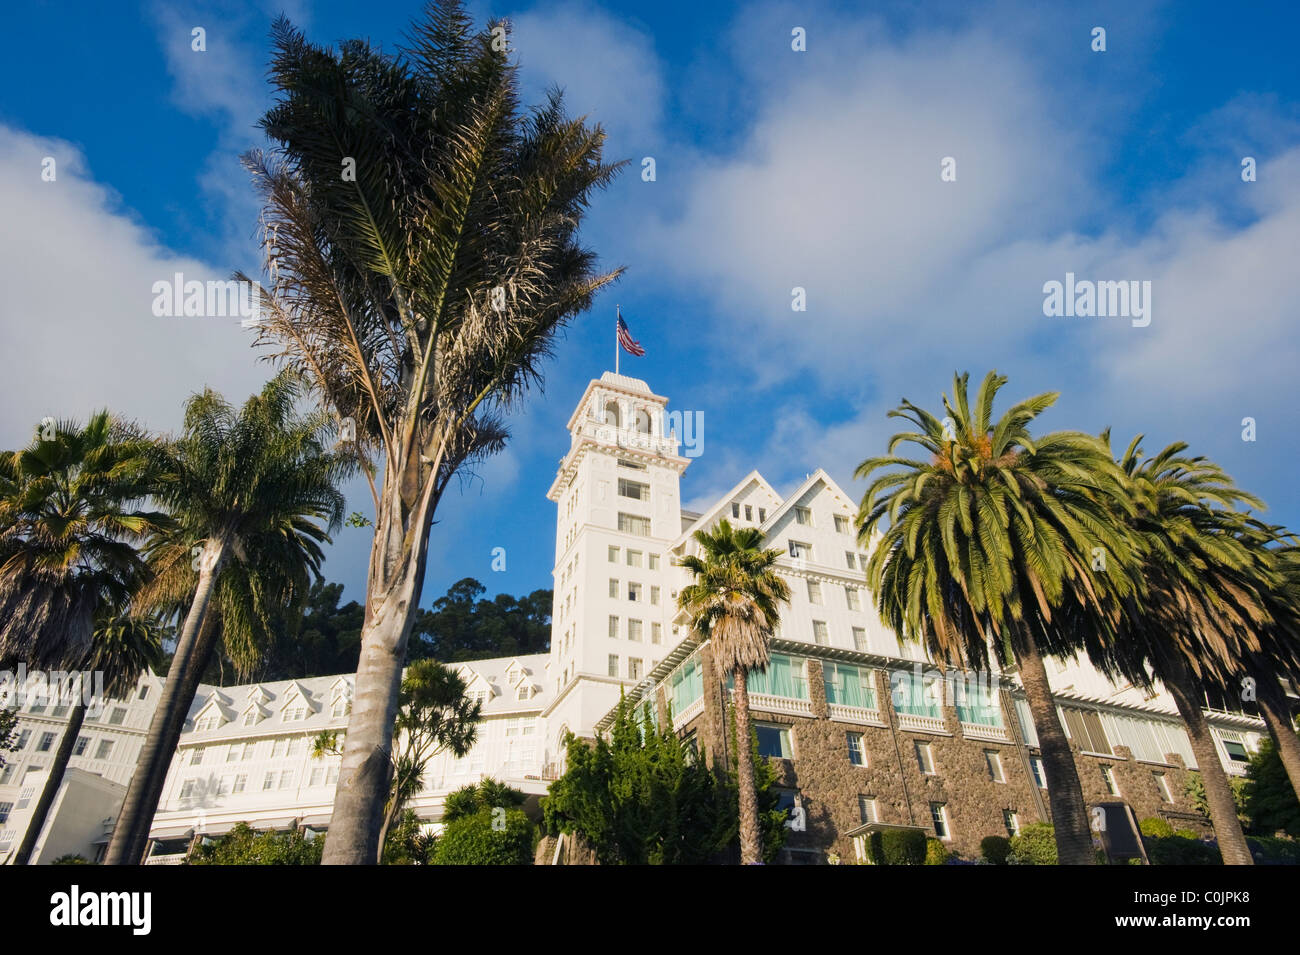 Claremont Hotel and Resort, Historic Hotel at dusk with Palm Trees, Berkeley, California USA Stock Photo